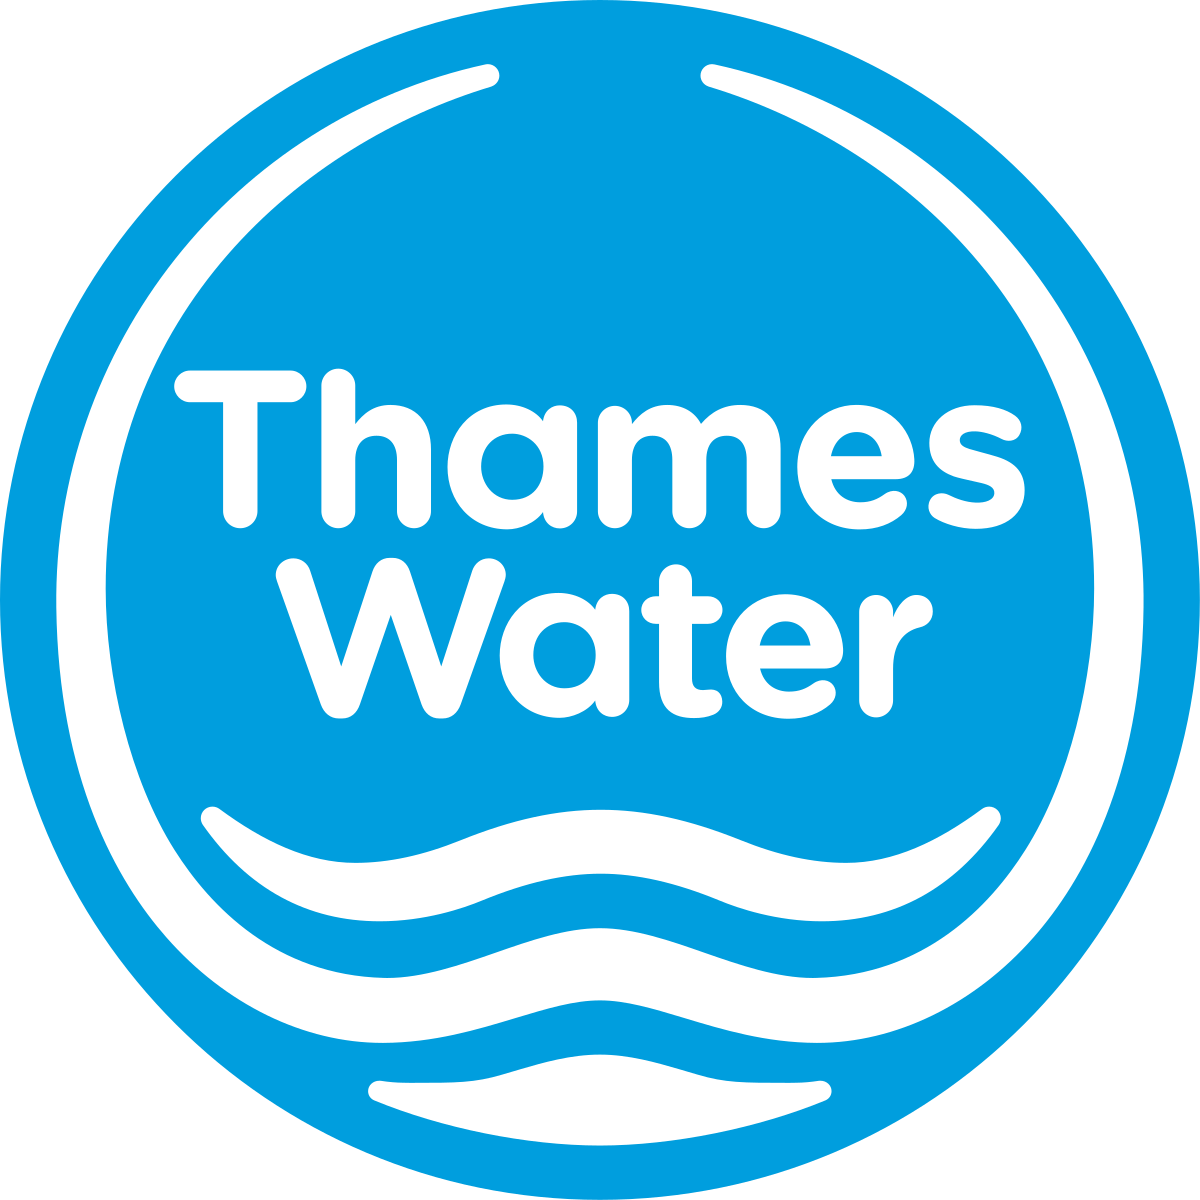 UK's Thames Water faces new crisis after shareholders refuse to invest